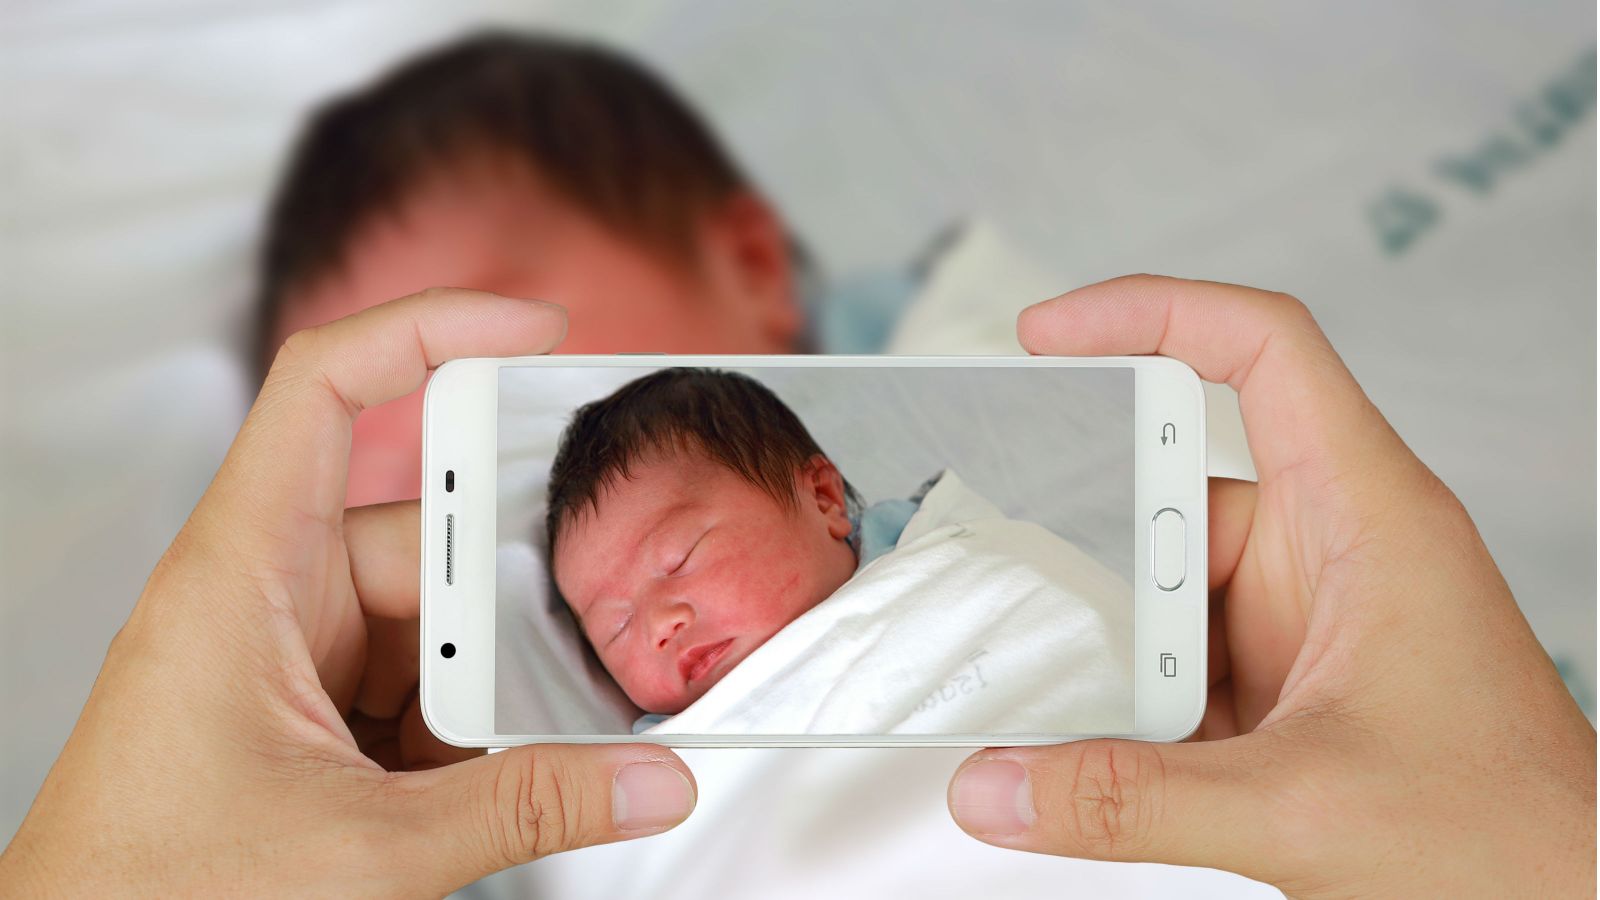 A new born baby being captured on by the camera of a smartphone.